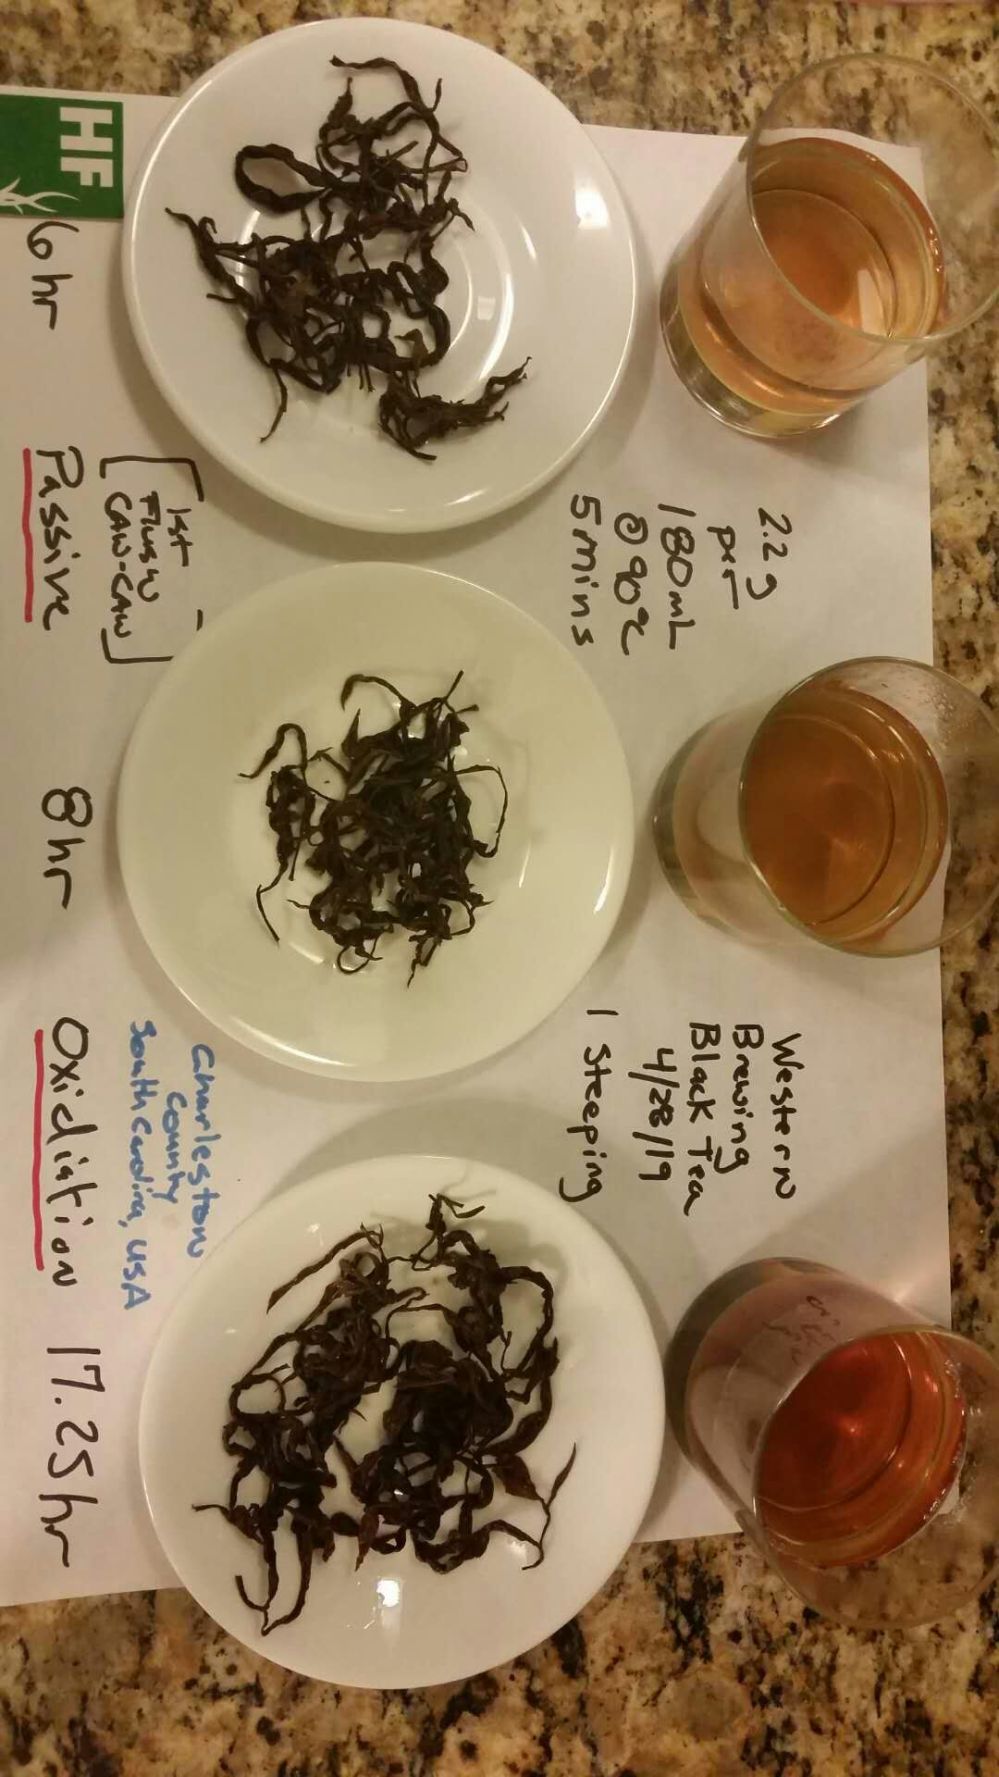 examples of black tea made finished caw caw